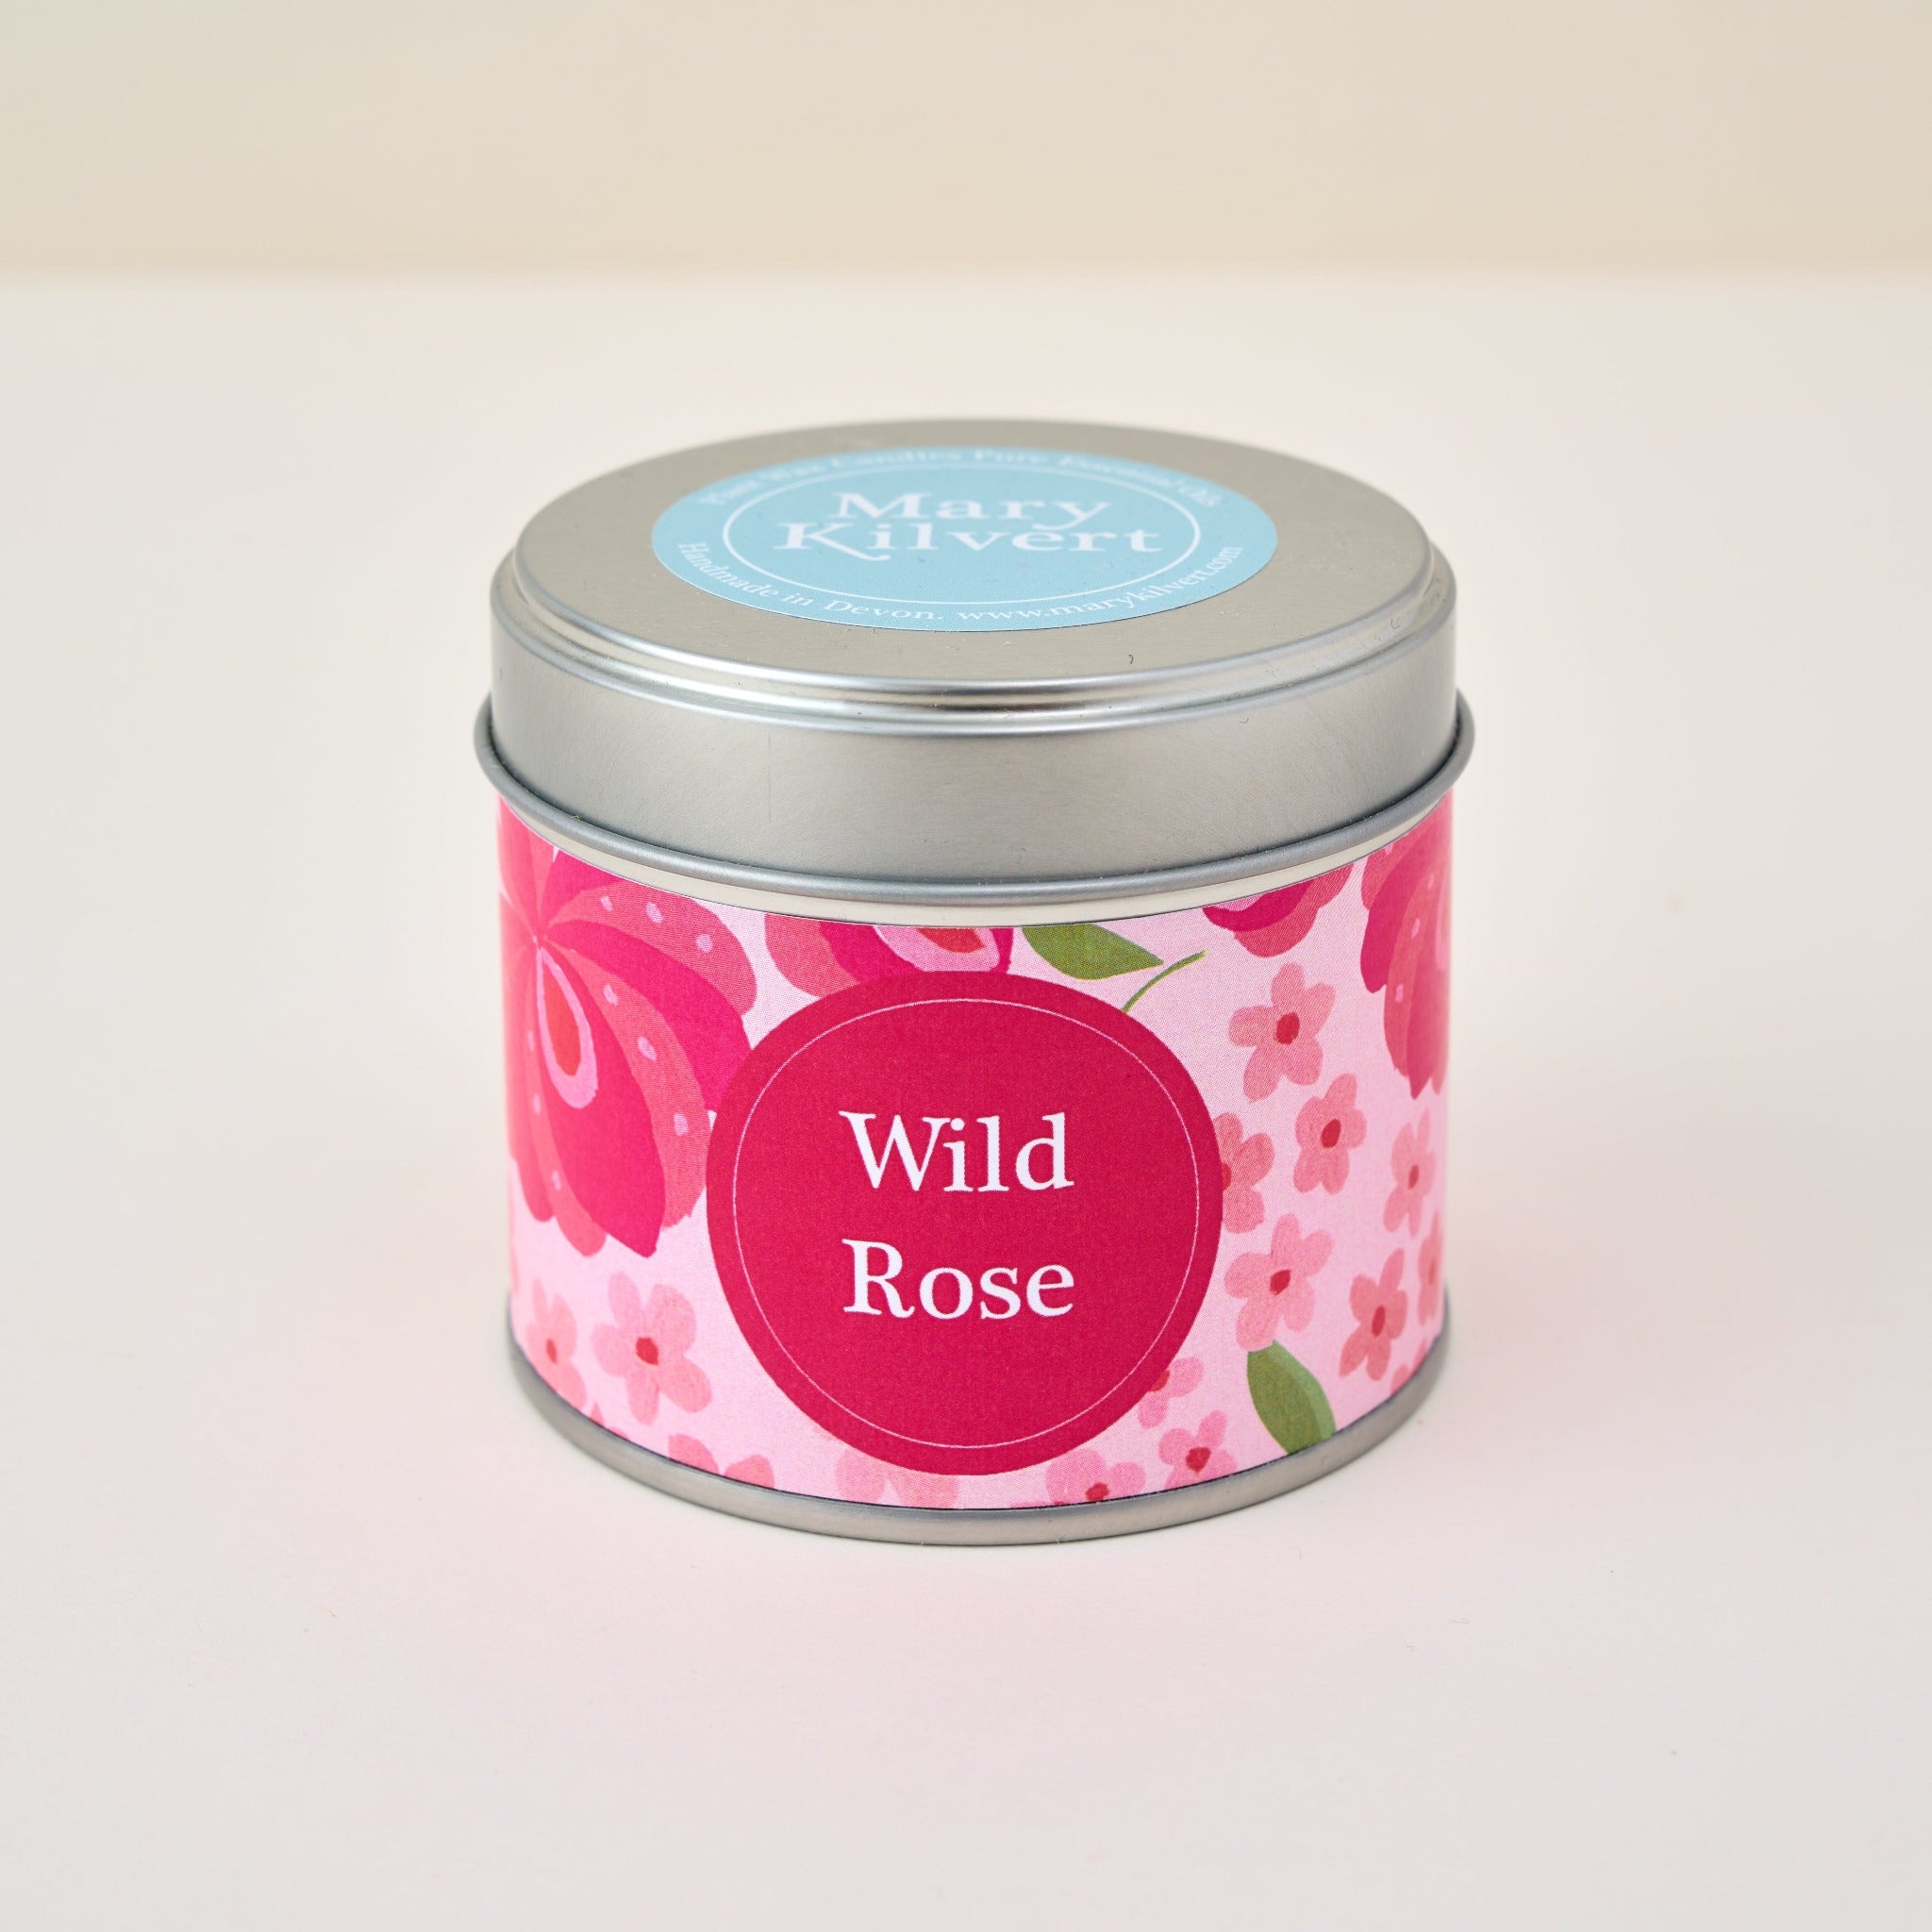 Wild Rose Candle by Mary Kilvert